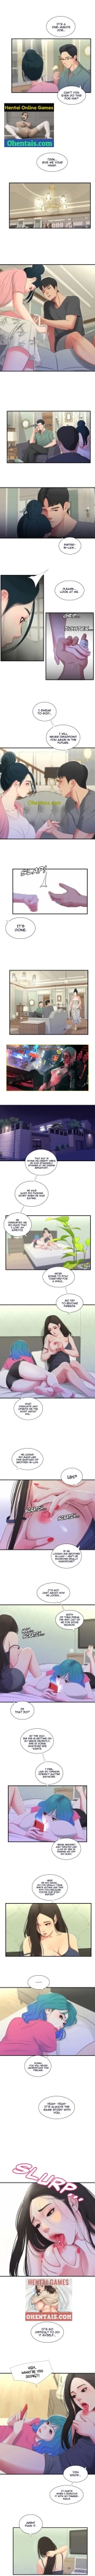 One's In-Laws Virgins Ch. 17-18 : page 11